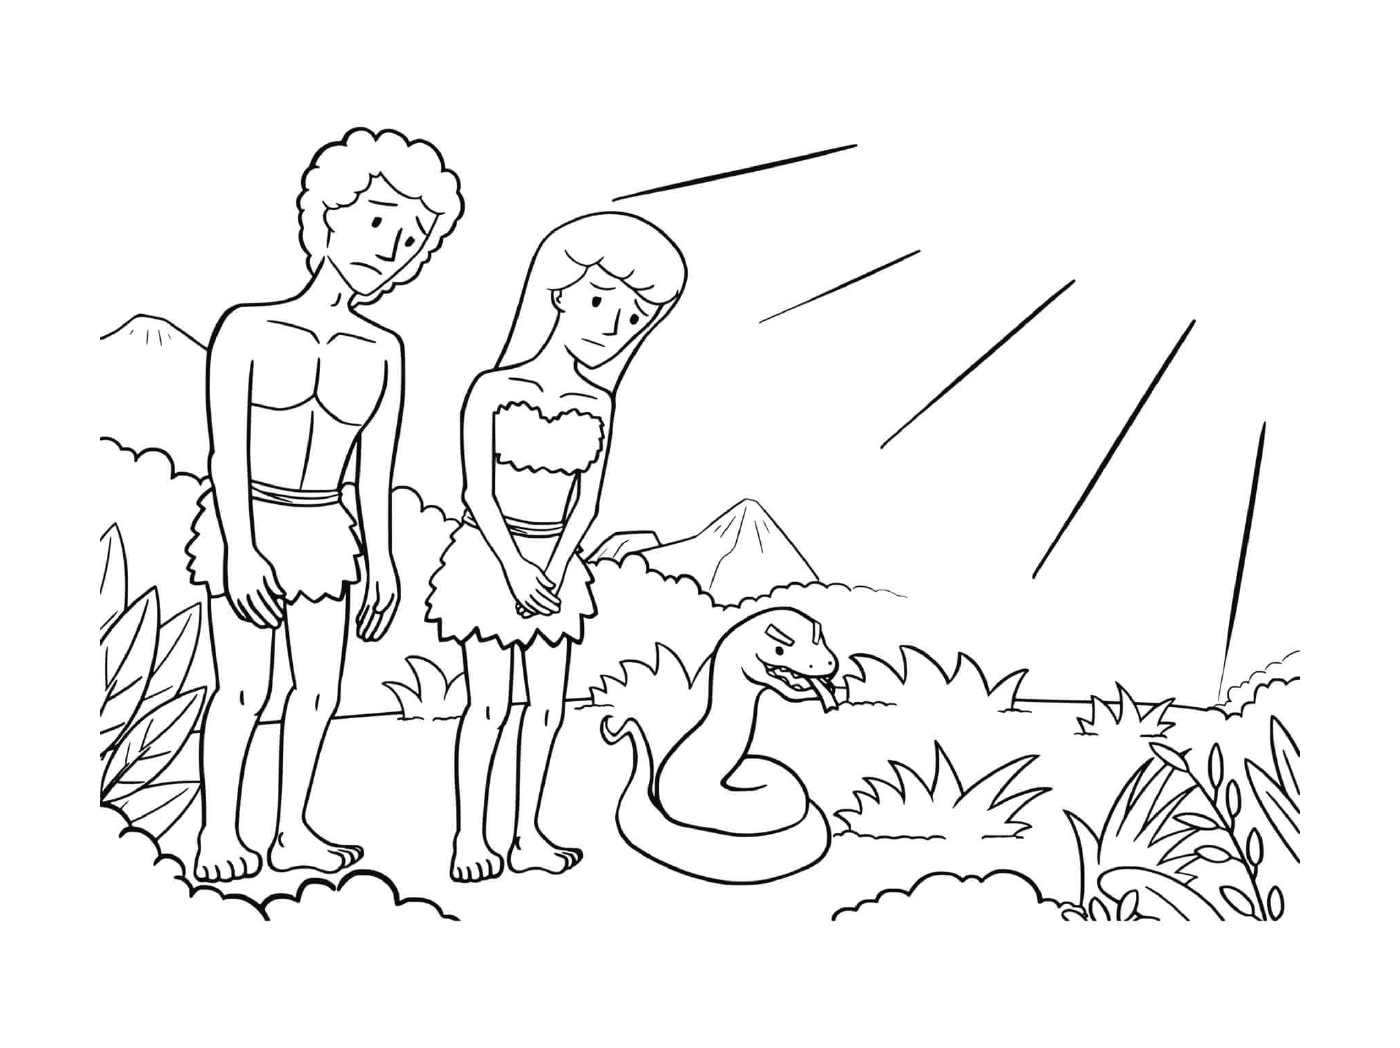  Man and woman standing next to a snake 